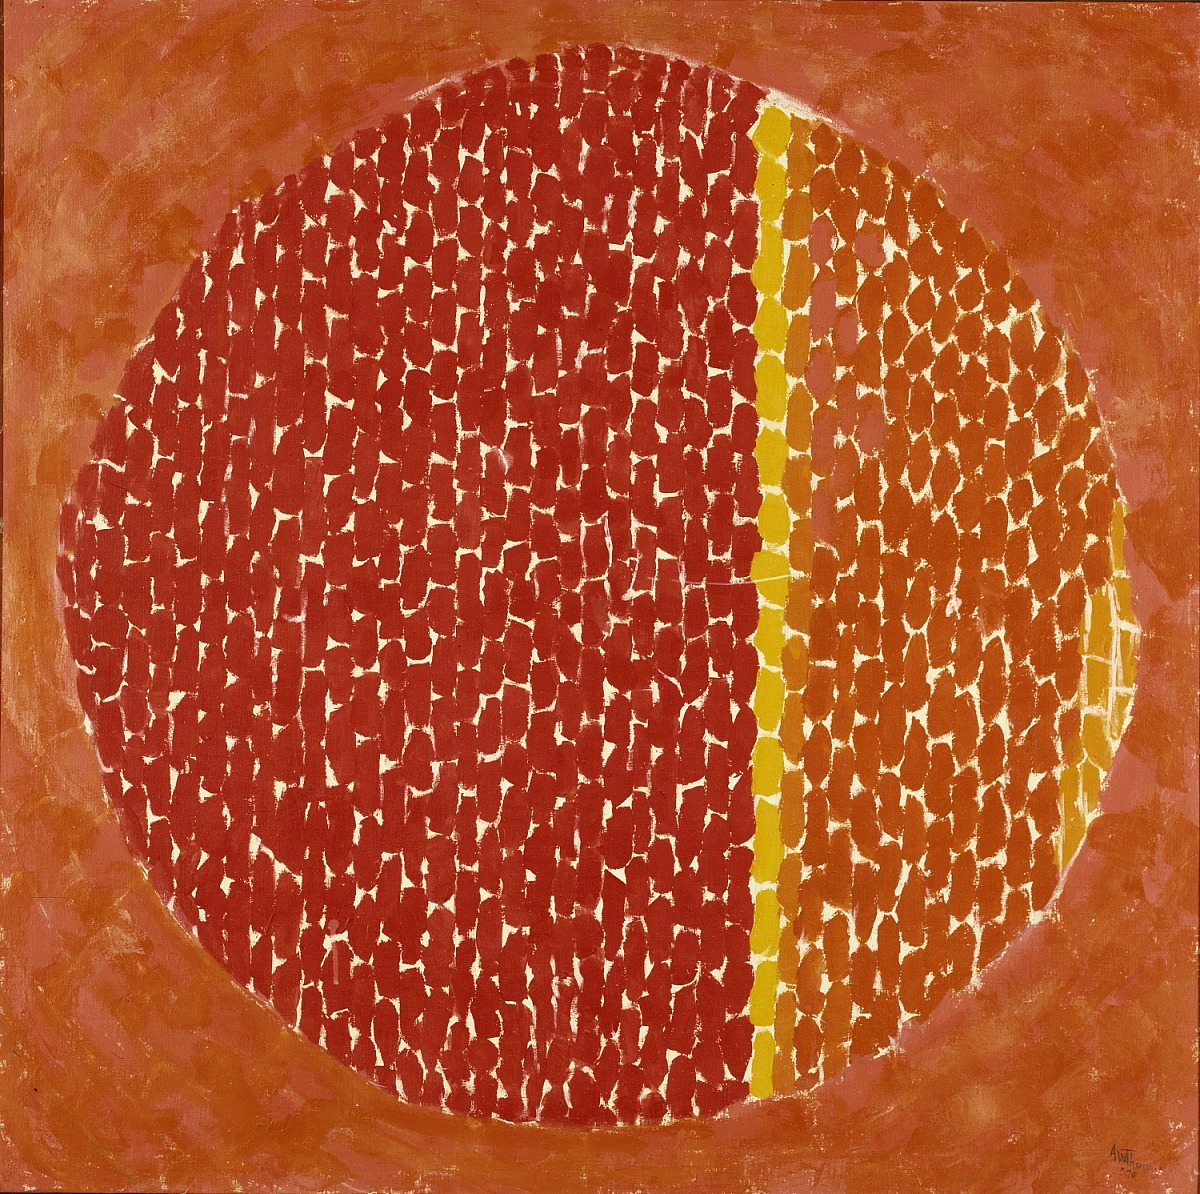 Snoopy Sees Earth Wrapped in Sunset. Composition of vertical paint splotches in dark orange, yellow, and light orange, arranged in vertical lines across an orange canvas, bounded in a circle, by Alma Thomas.